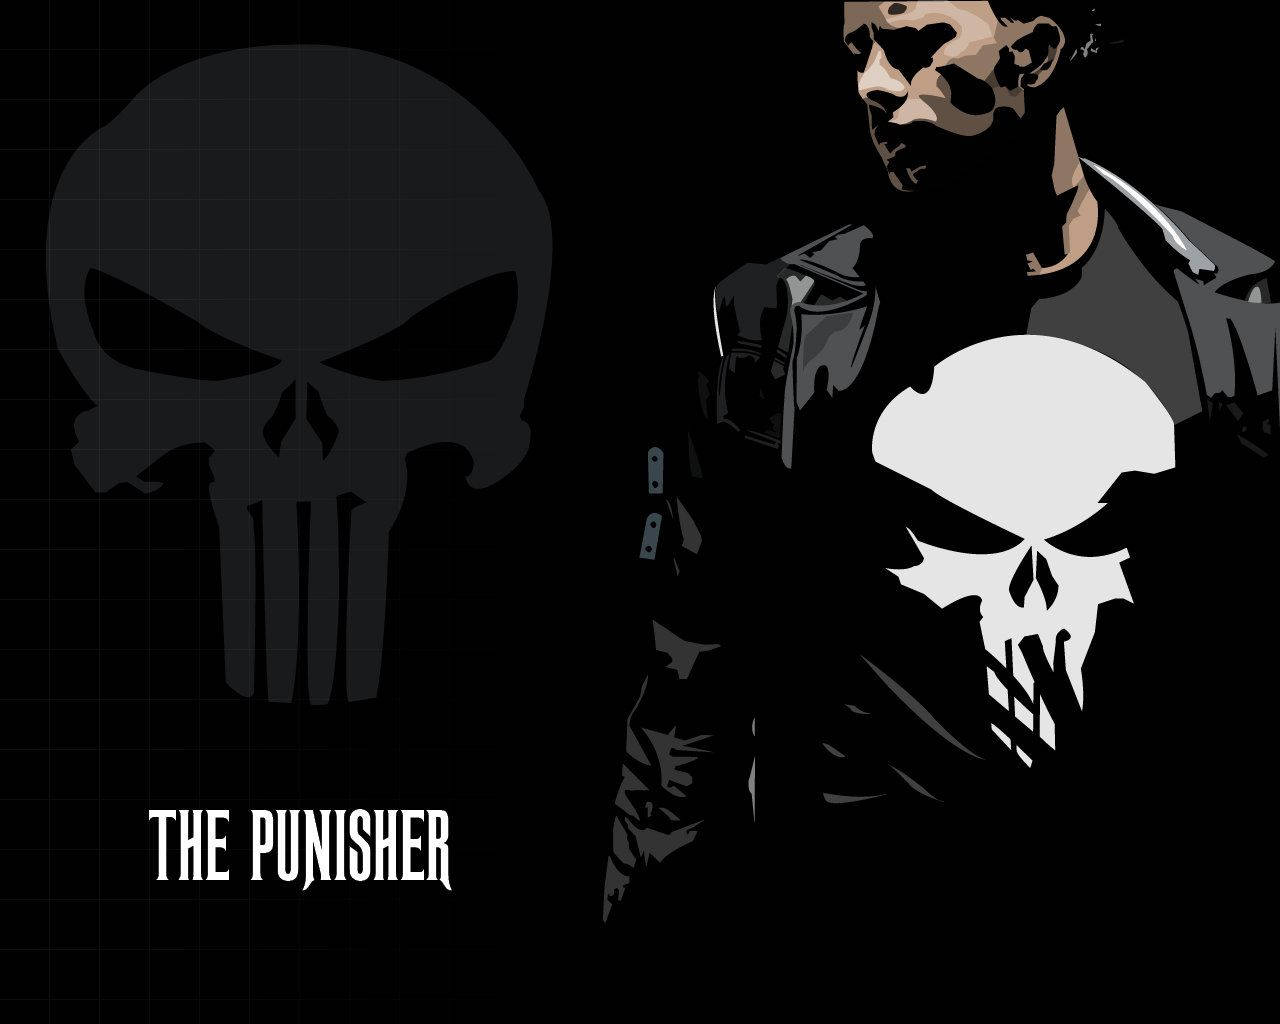 The Punisher Logo And Frank Castle